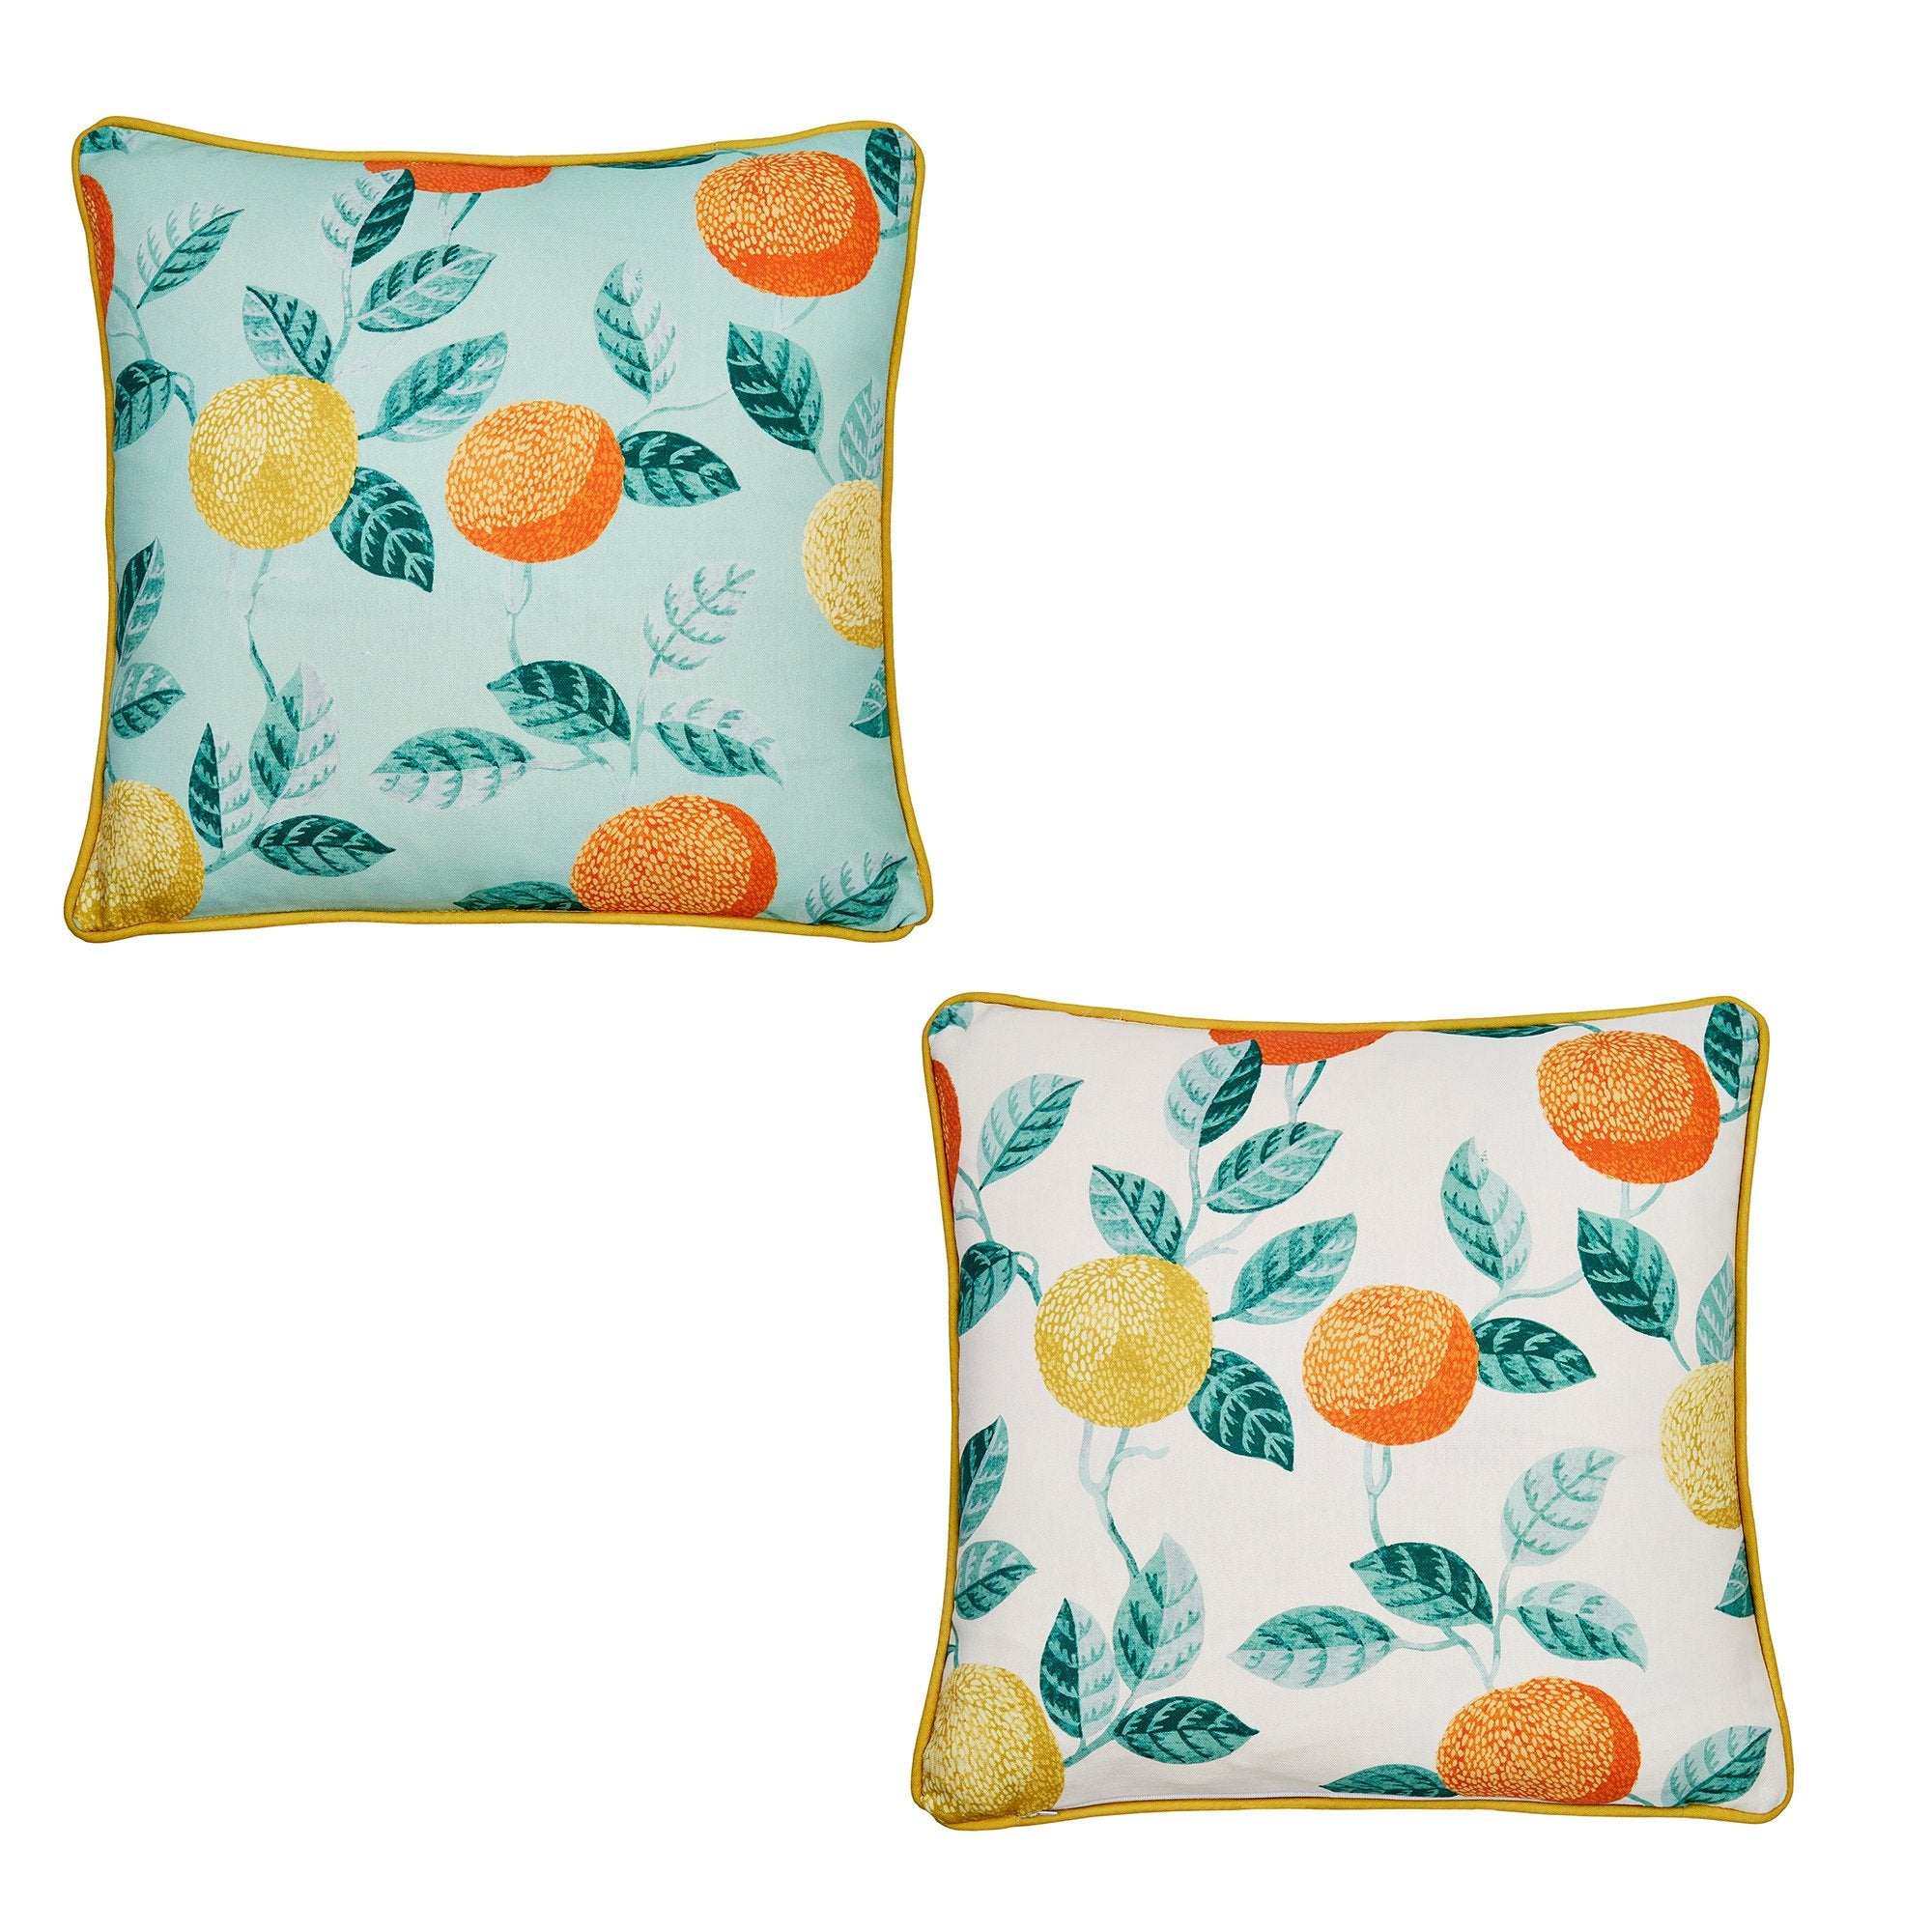 Cushion Botanical Fruits Outdoor by Dreams & Drapes Design in Green